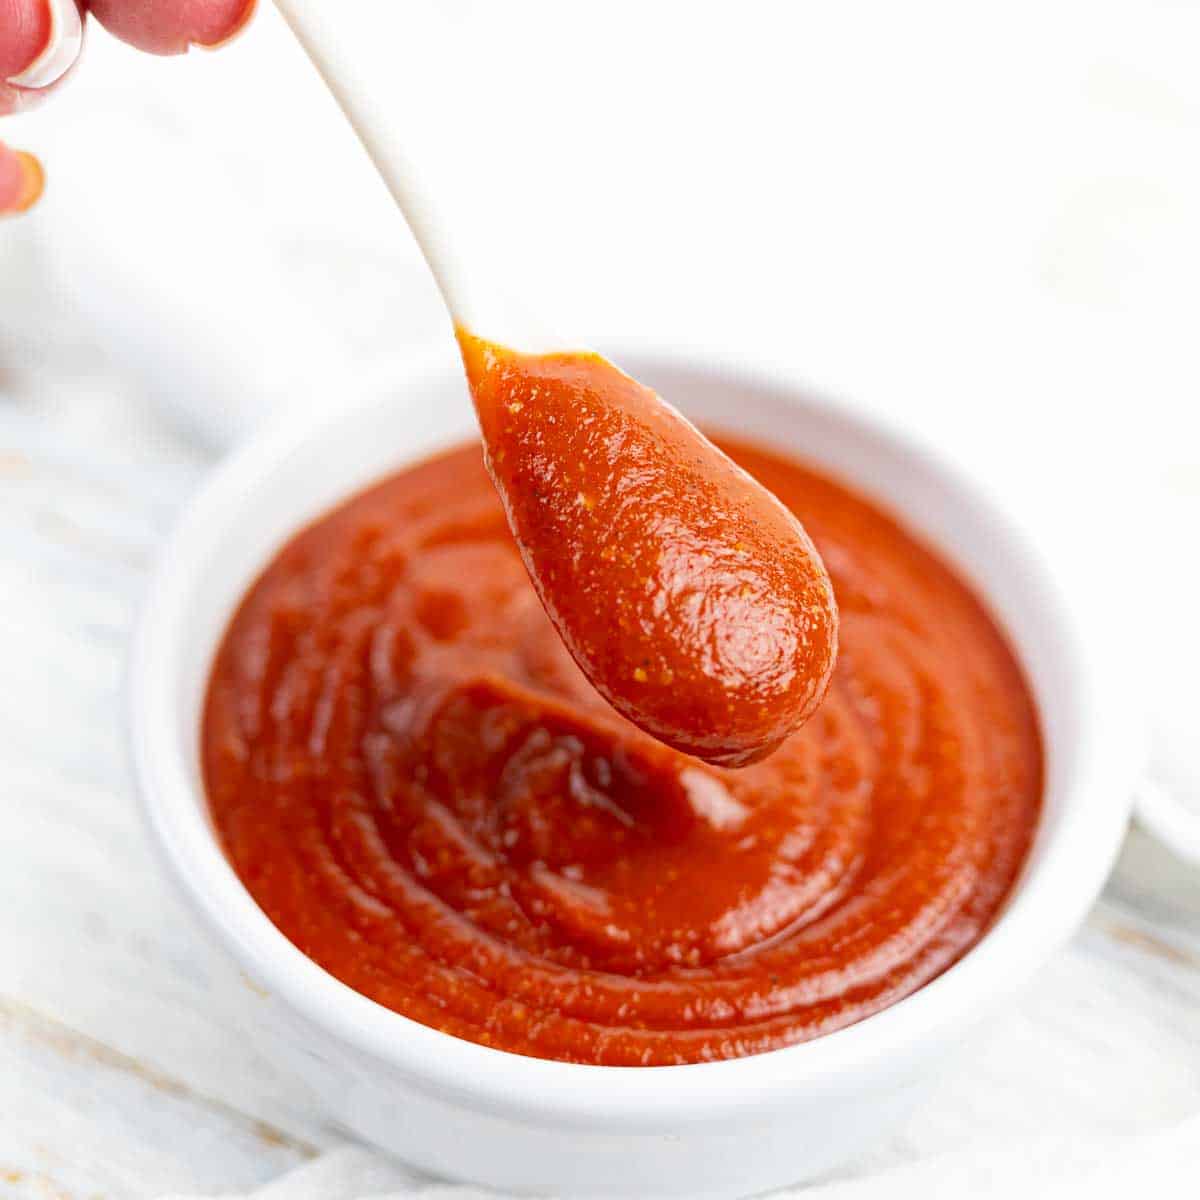 A person is dipping a spoon into a bowl of sauce.